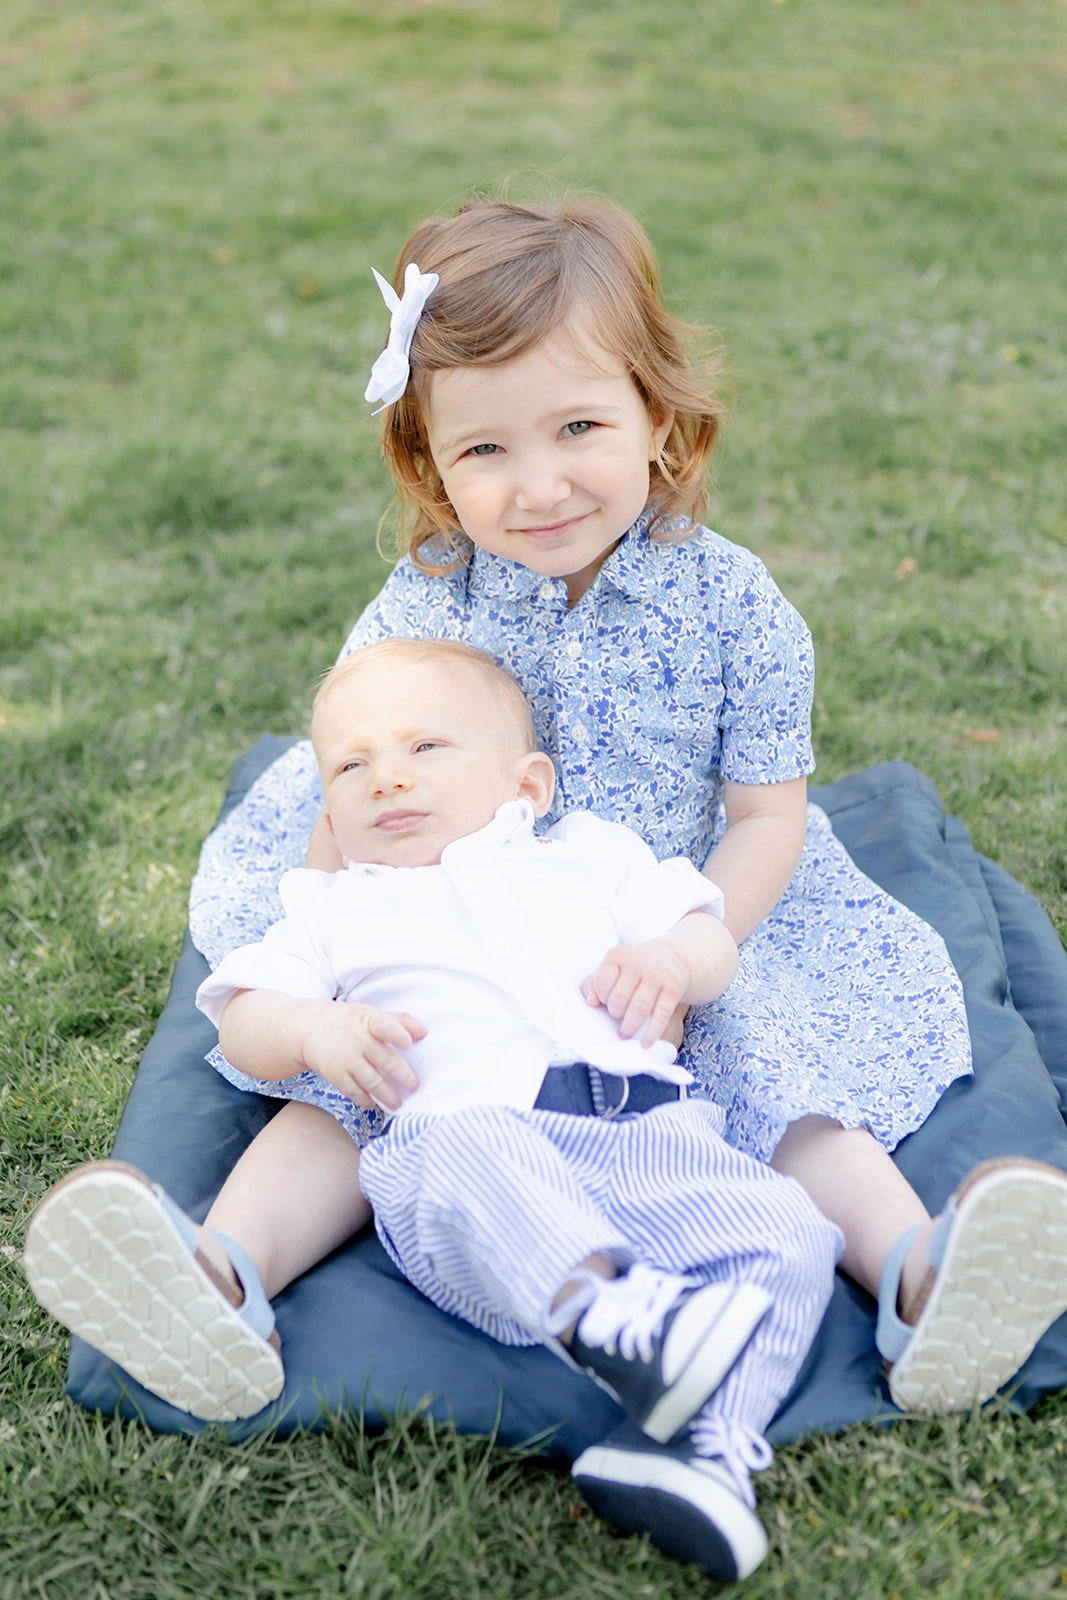 Lilah Sachs is photographed holding her baby brother in her lap. Her baby brother is quite squirmy, but the big sister calmly holds him and smiles at the camera, her cute sandals and feet naturally framing the image. The pair sit on a green, grassy field during springtime in Connecticut.